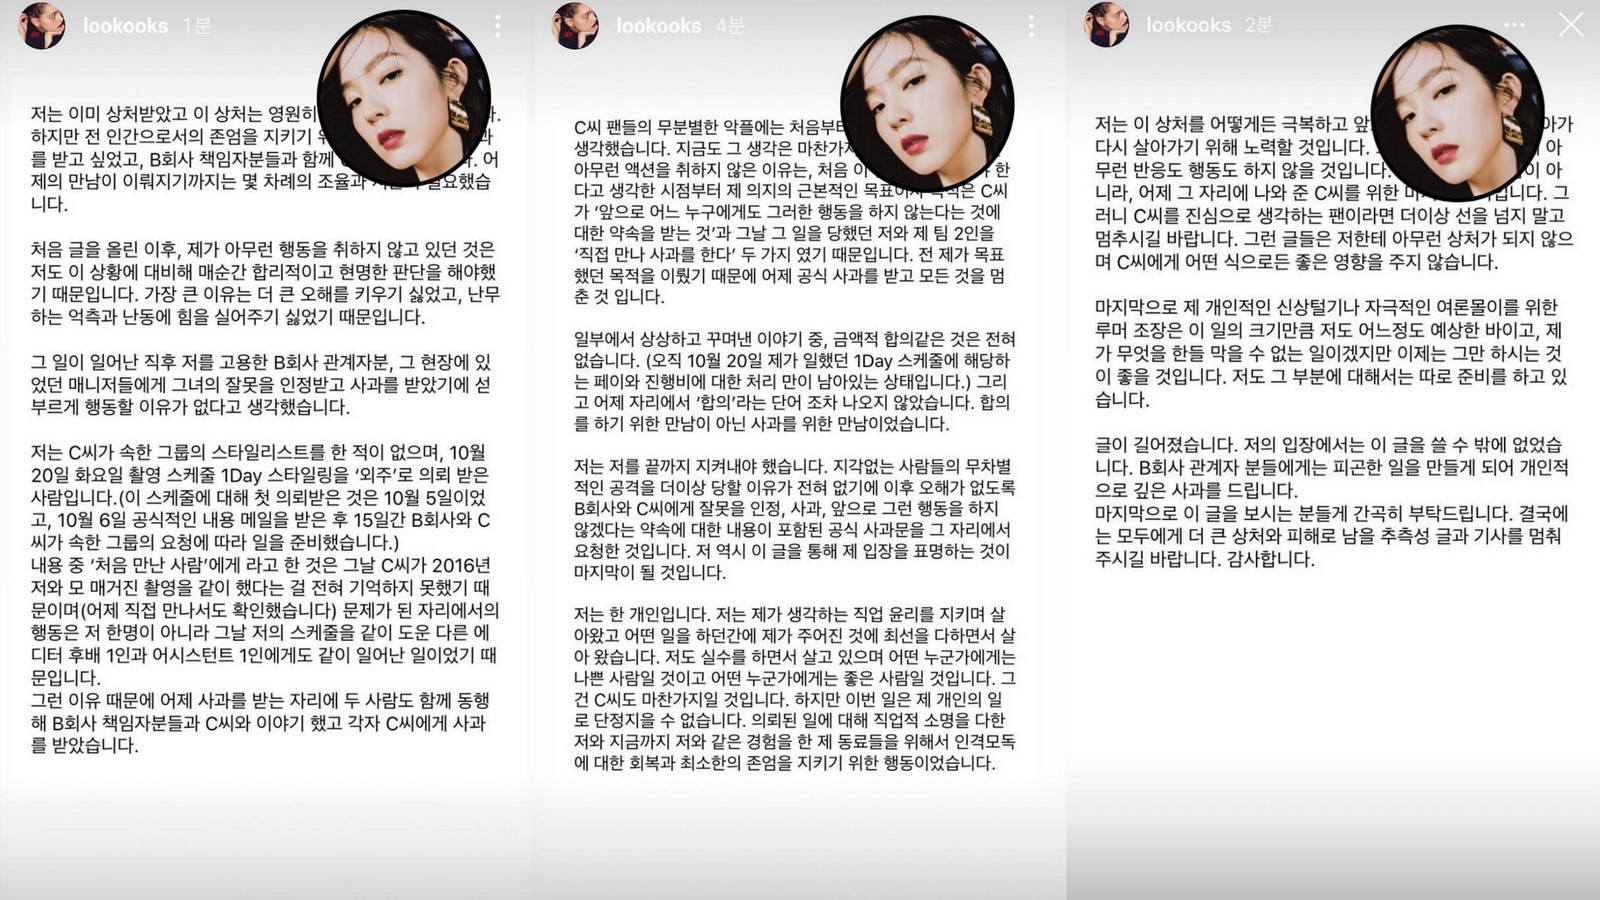 editor-kang-kook-hwa-speaks-up-after-getting-apology-from-irene-hoping-to-end-the-issue-2